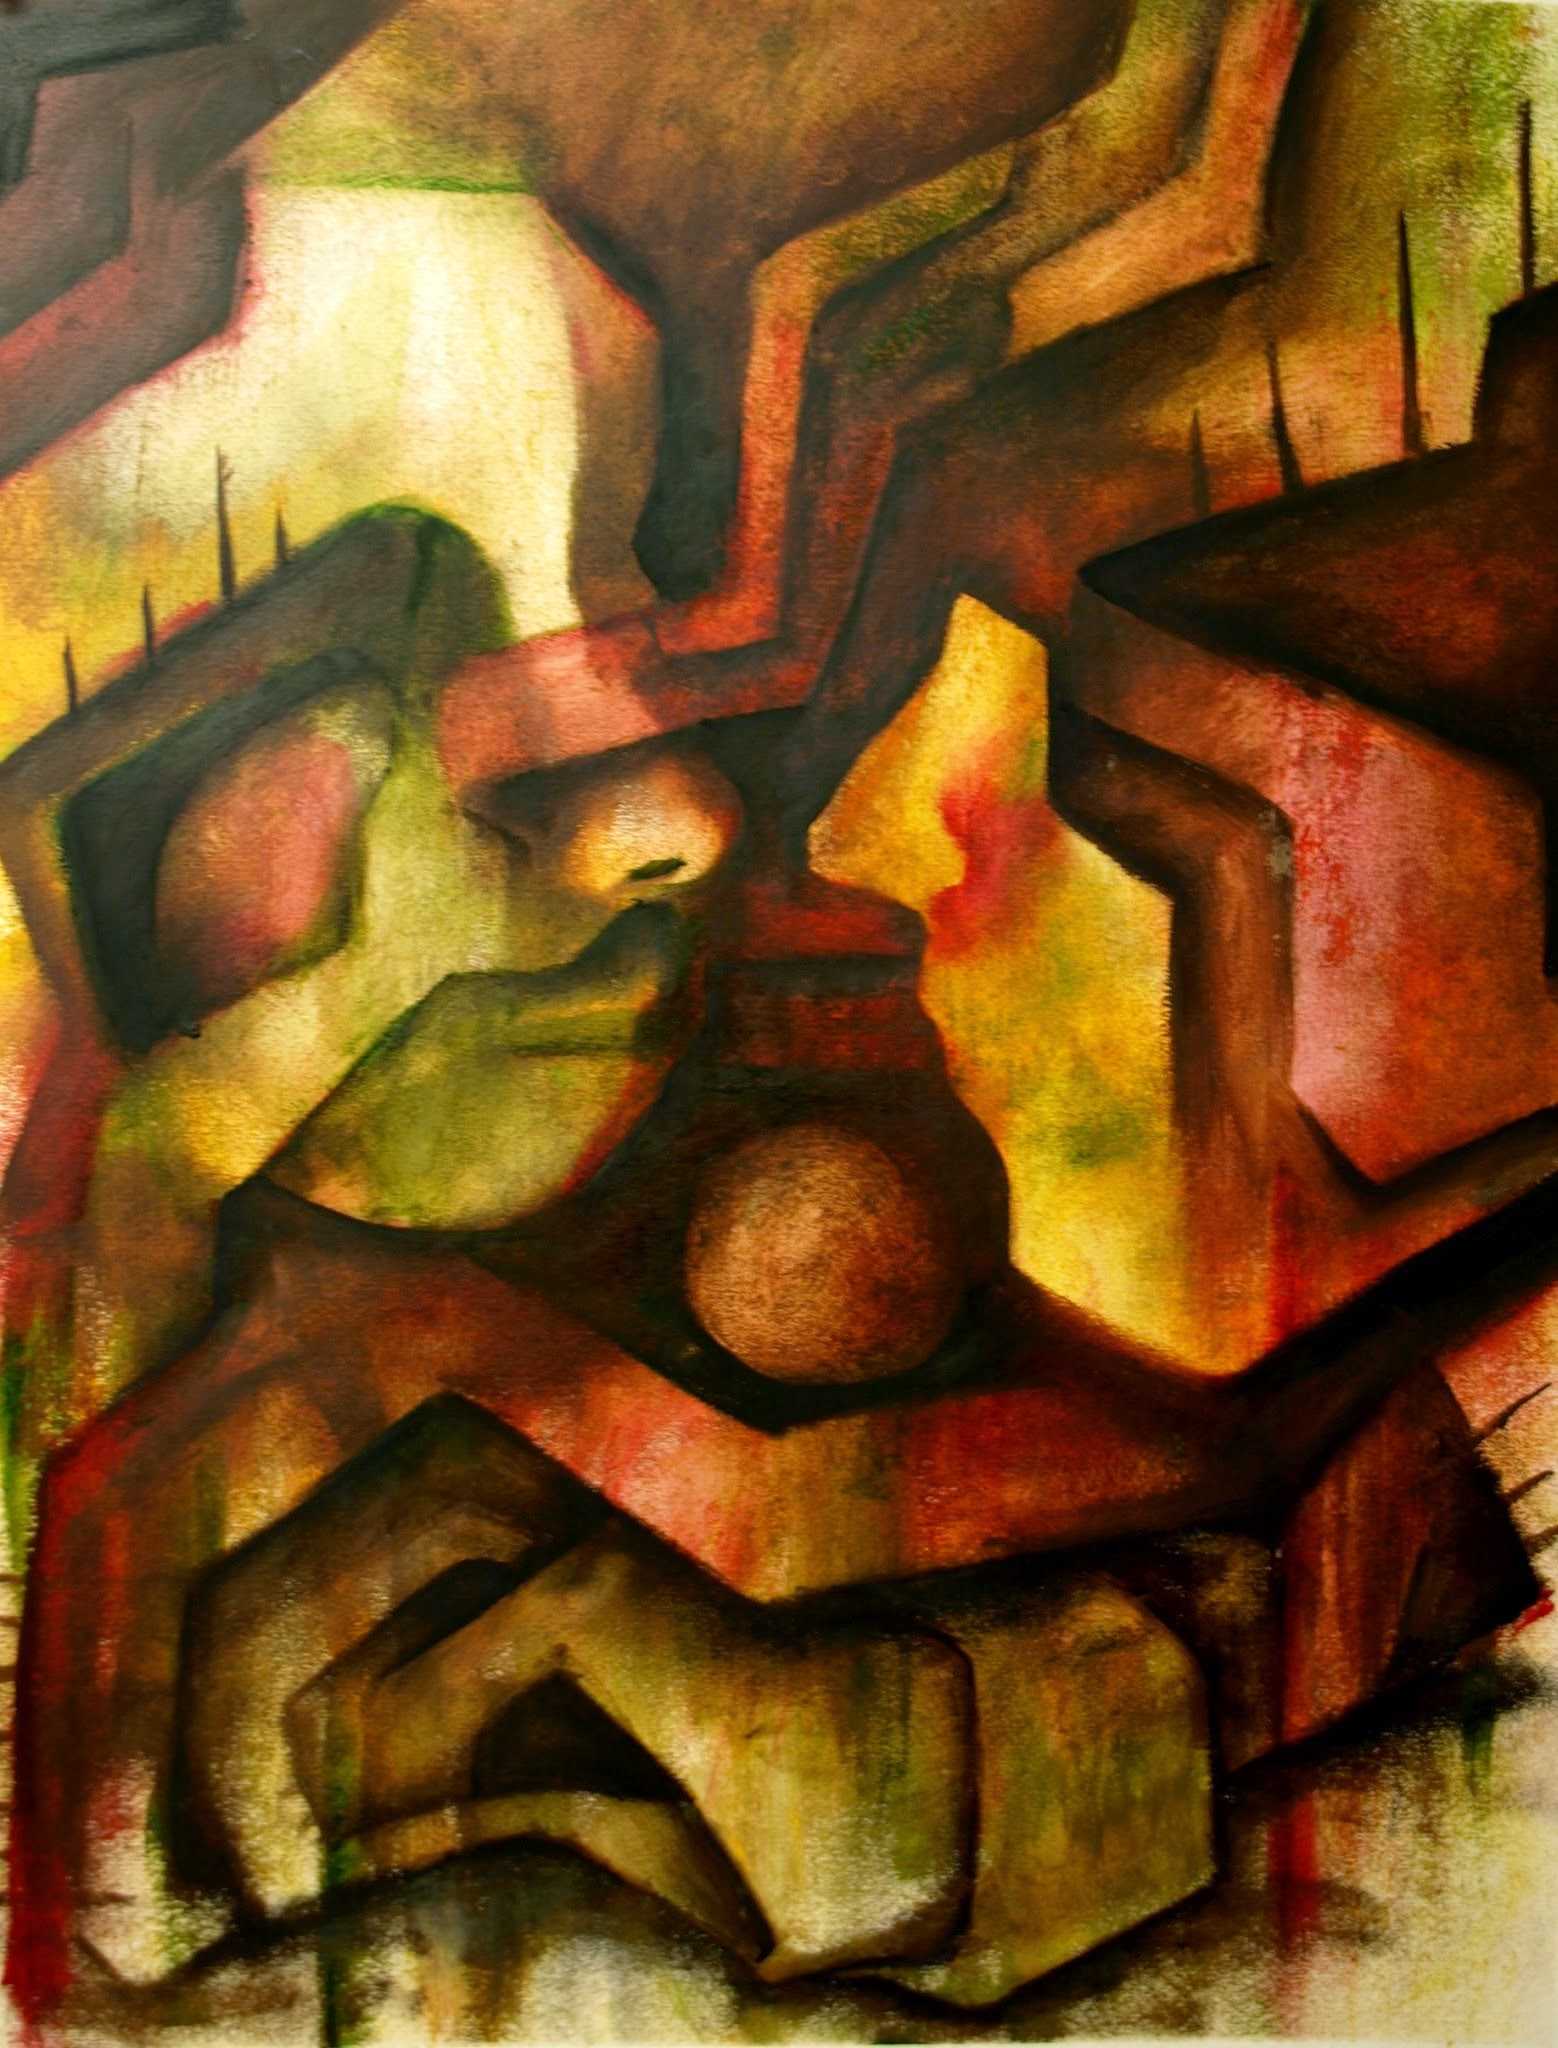 Abstracted, sculptural shapes, in the form of faces looking to each other